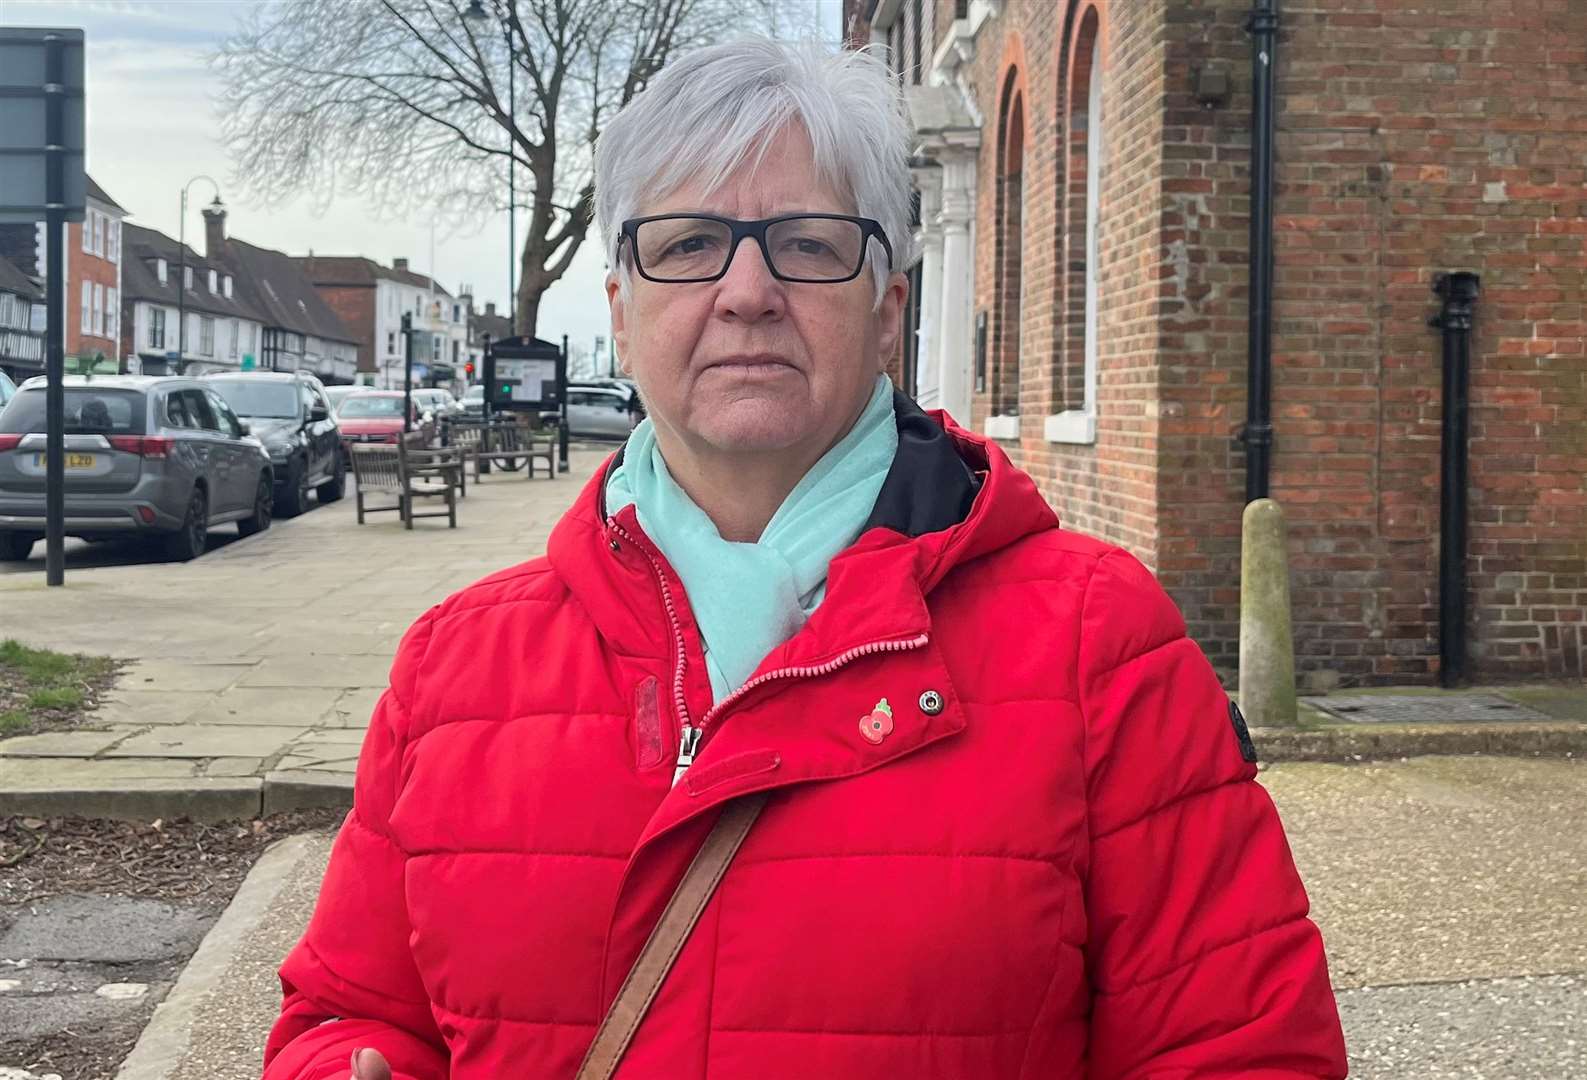 Hazel Savage, 72, thought more could be done to realise the dreams of a cinema returning to Tenterden